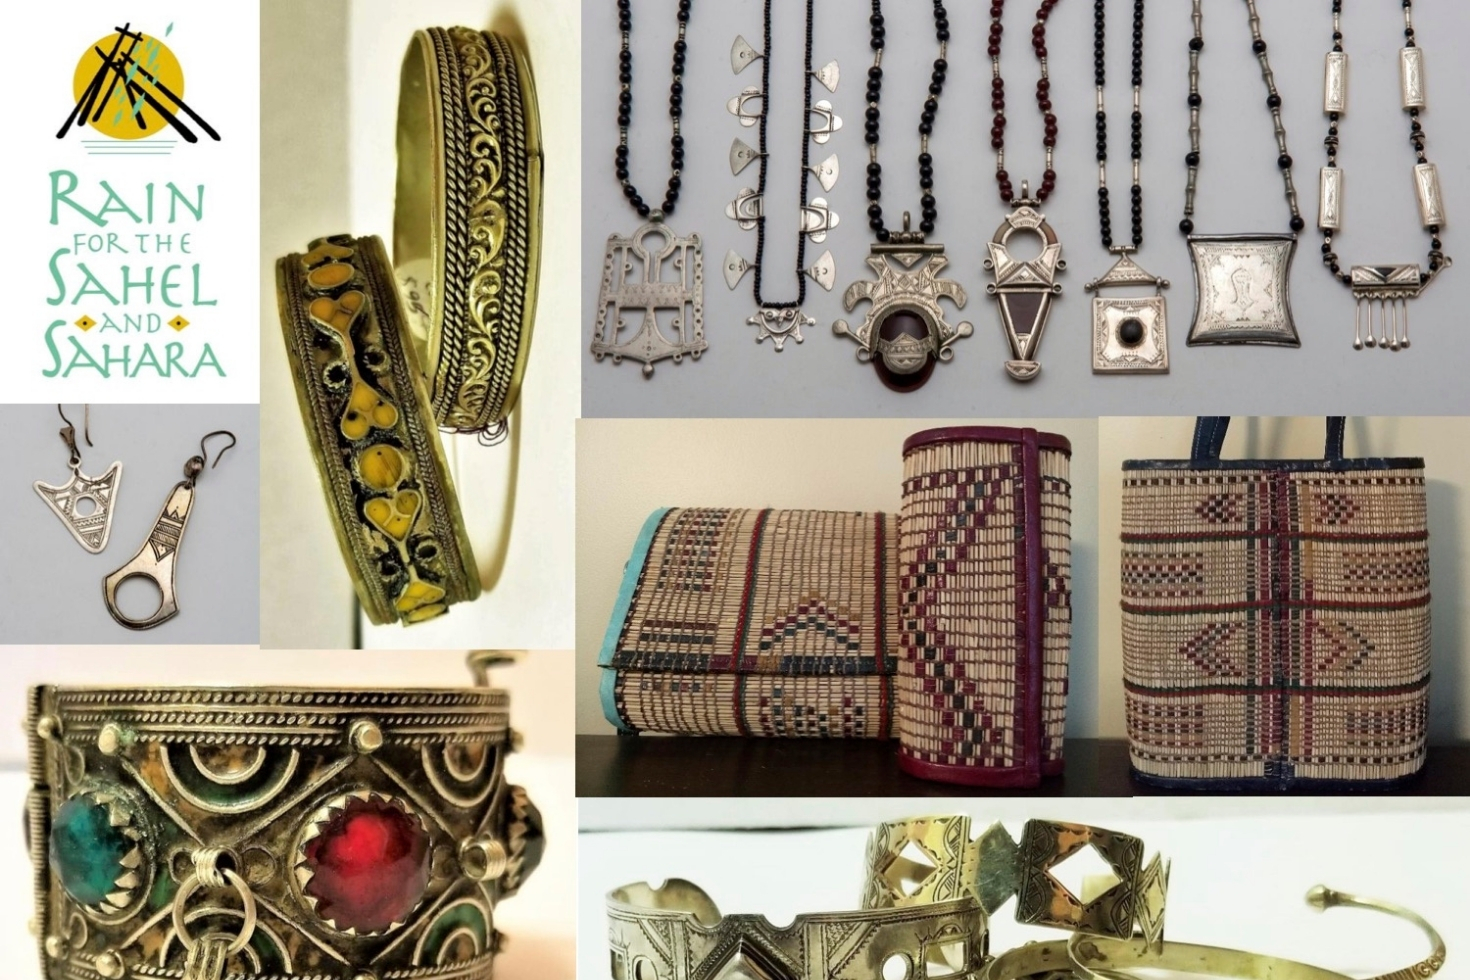 Assorted jewelry, including necklaces and bracelets